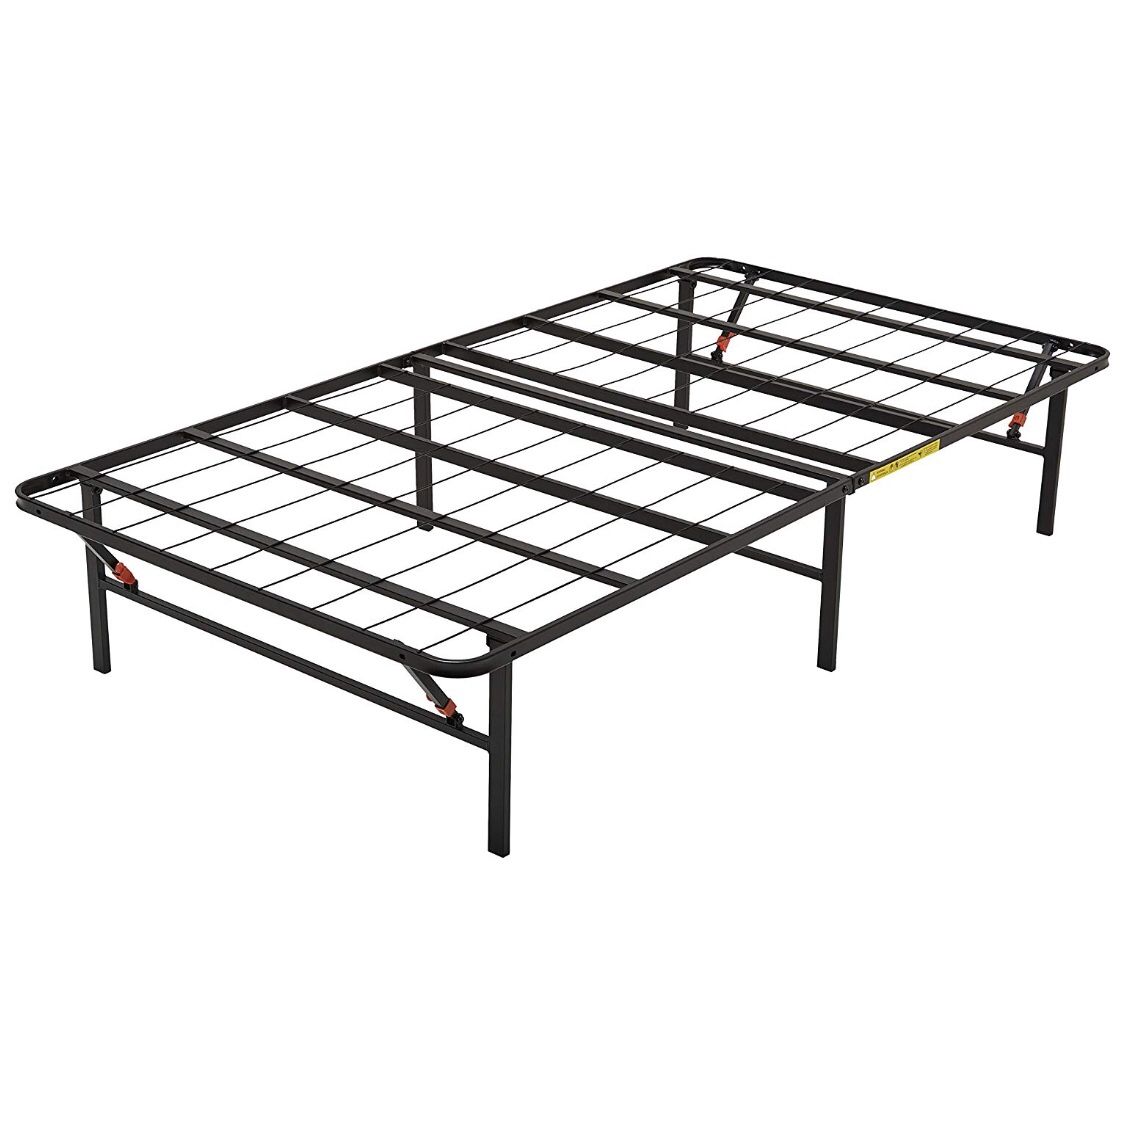 Twin bed frame - foldable